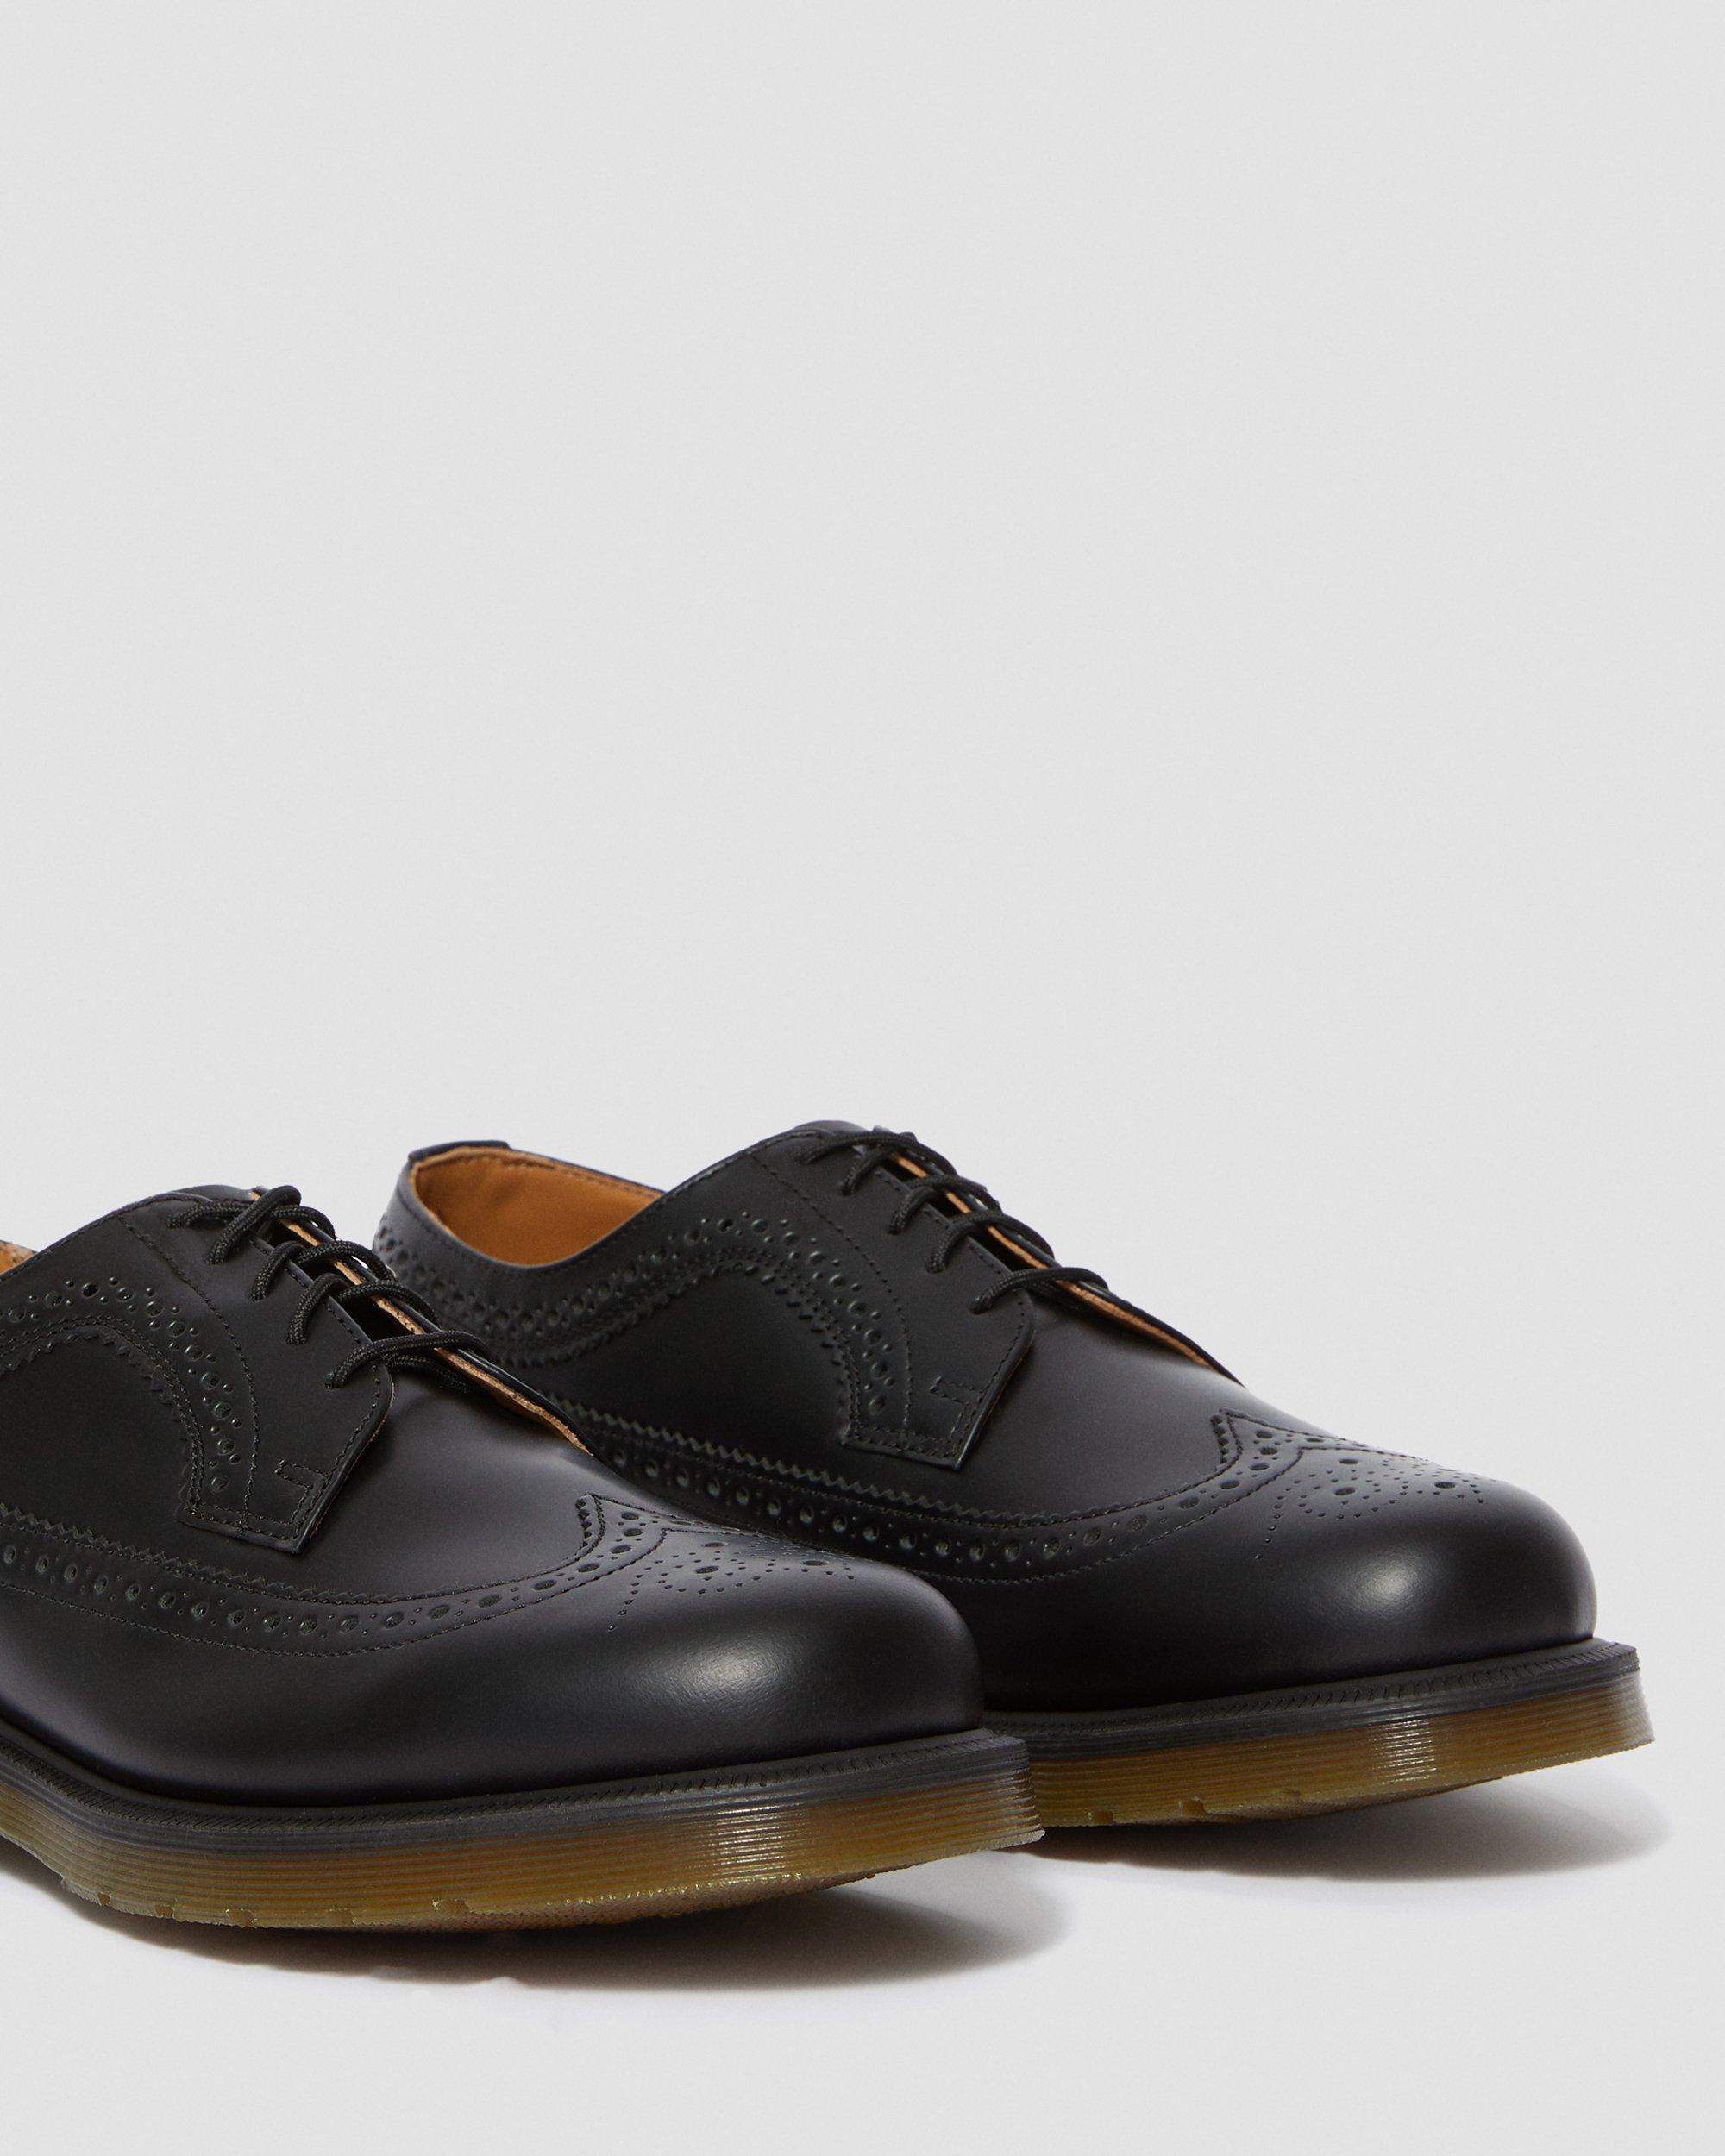 3989 Smooth Leather Brogue Shoes in Black